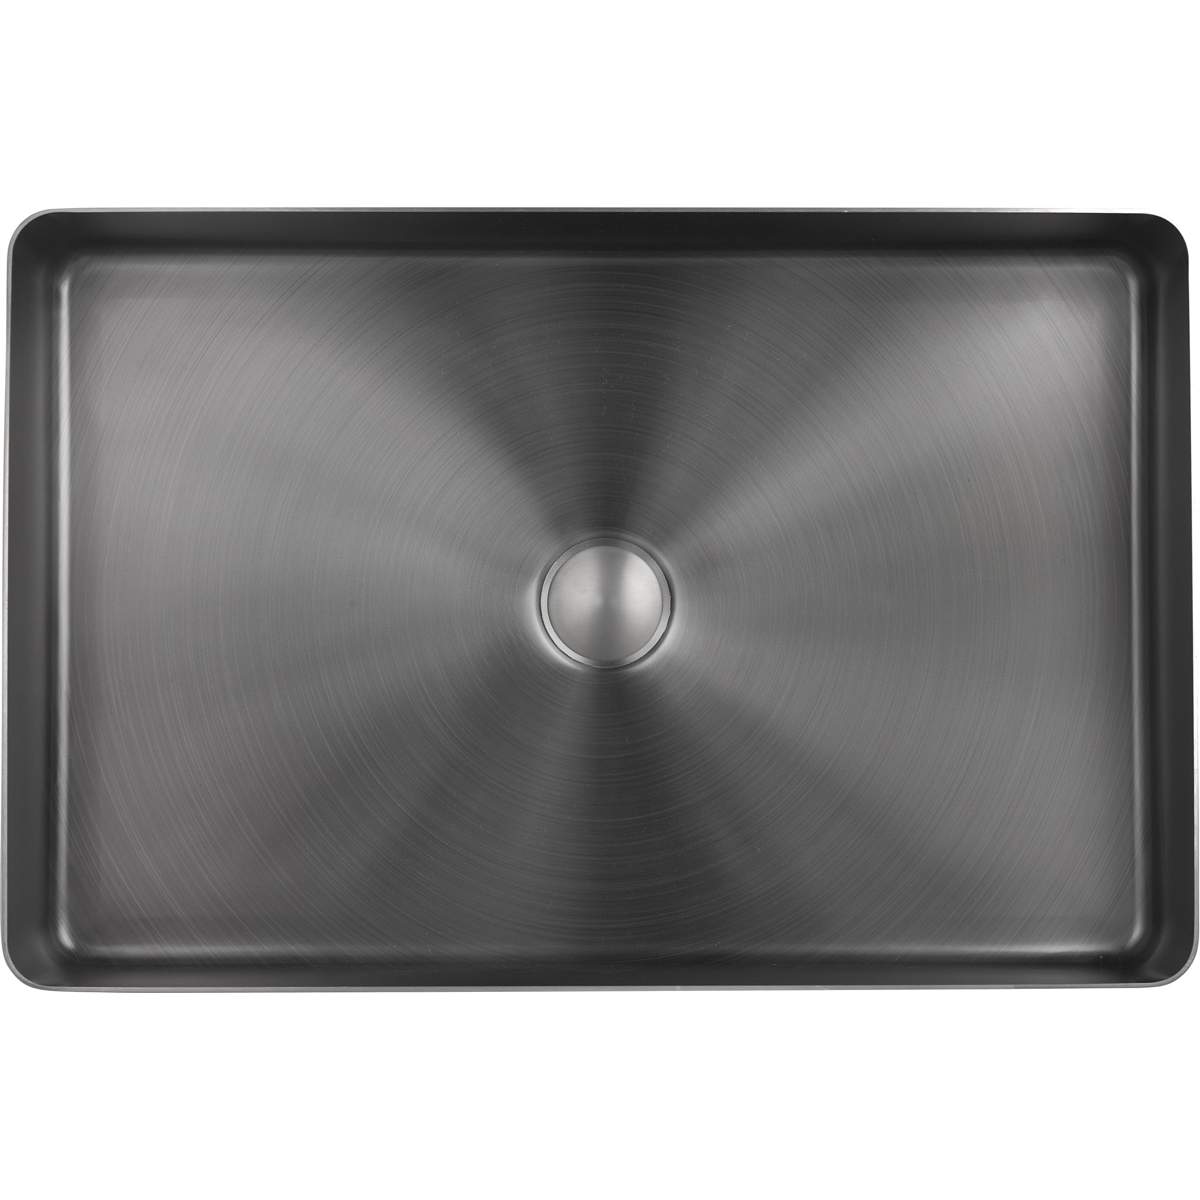 JTP Vos Brushed Black Grade 316 Stainless Steel Counter Top Basin (27CTS520BBL)